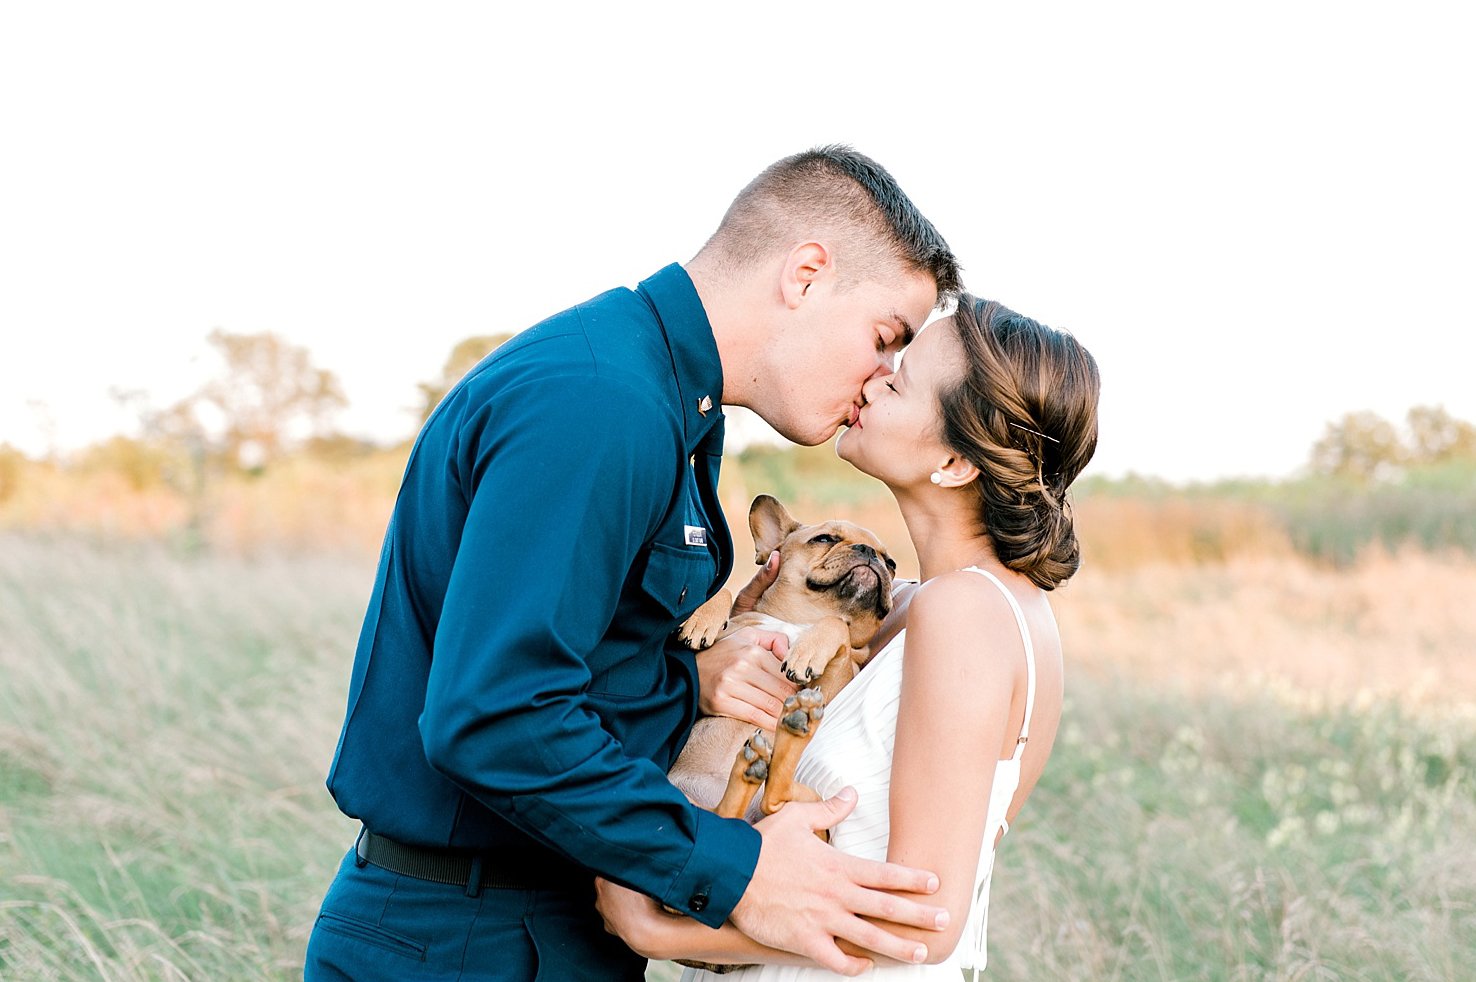 august18-rhode-island-engagement-photography-field-couples-portraits-field-frenchie-puppy-2.jpg